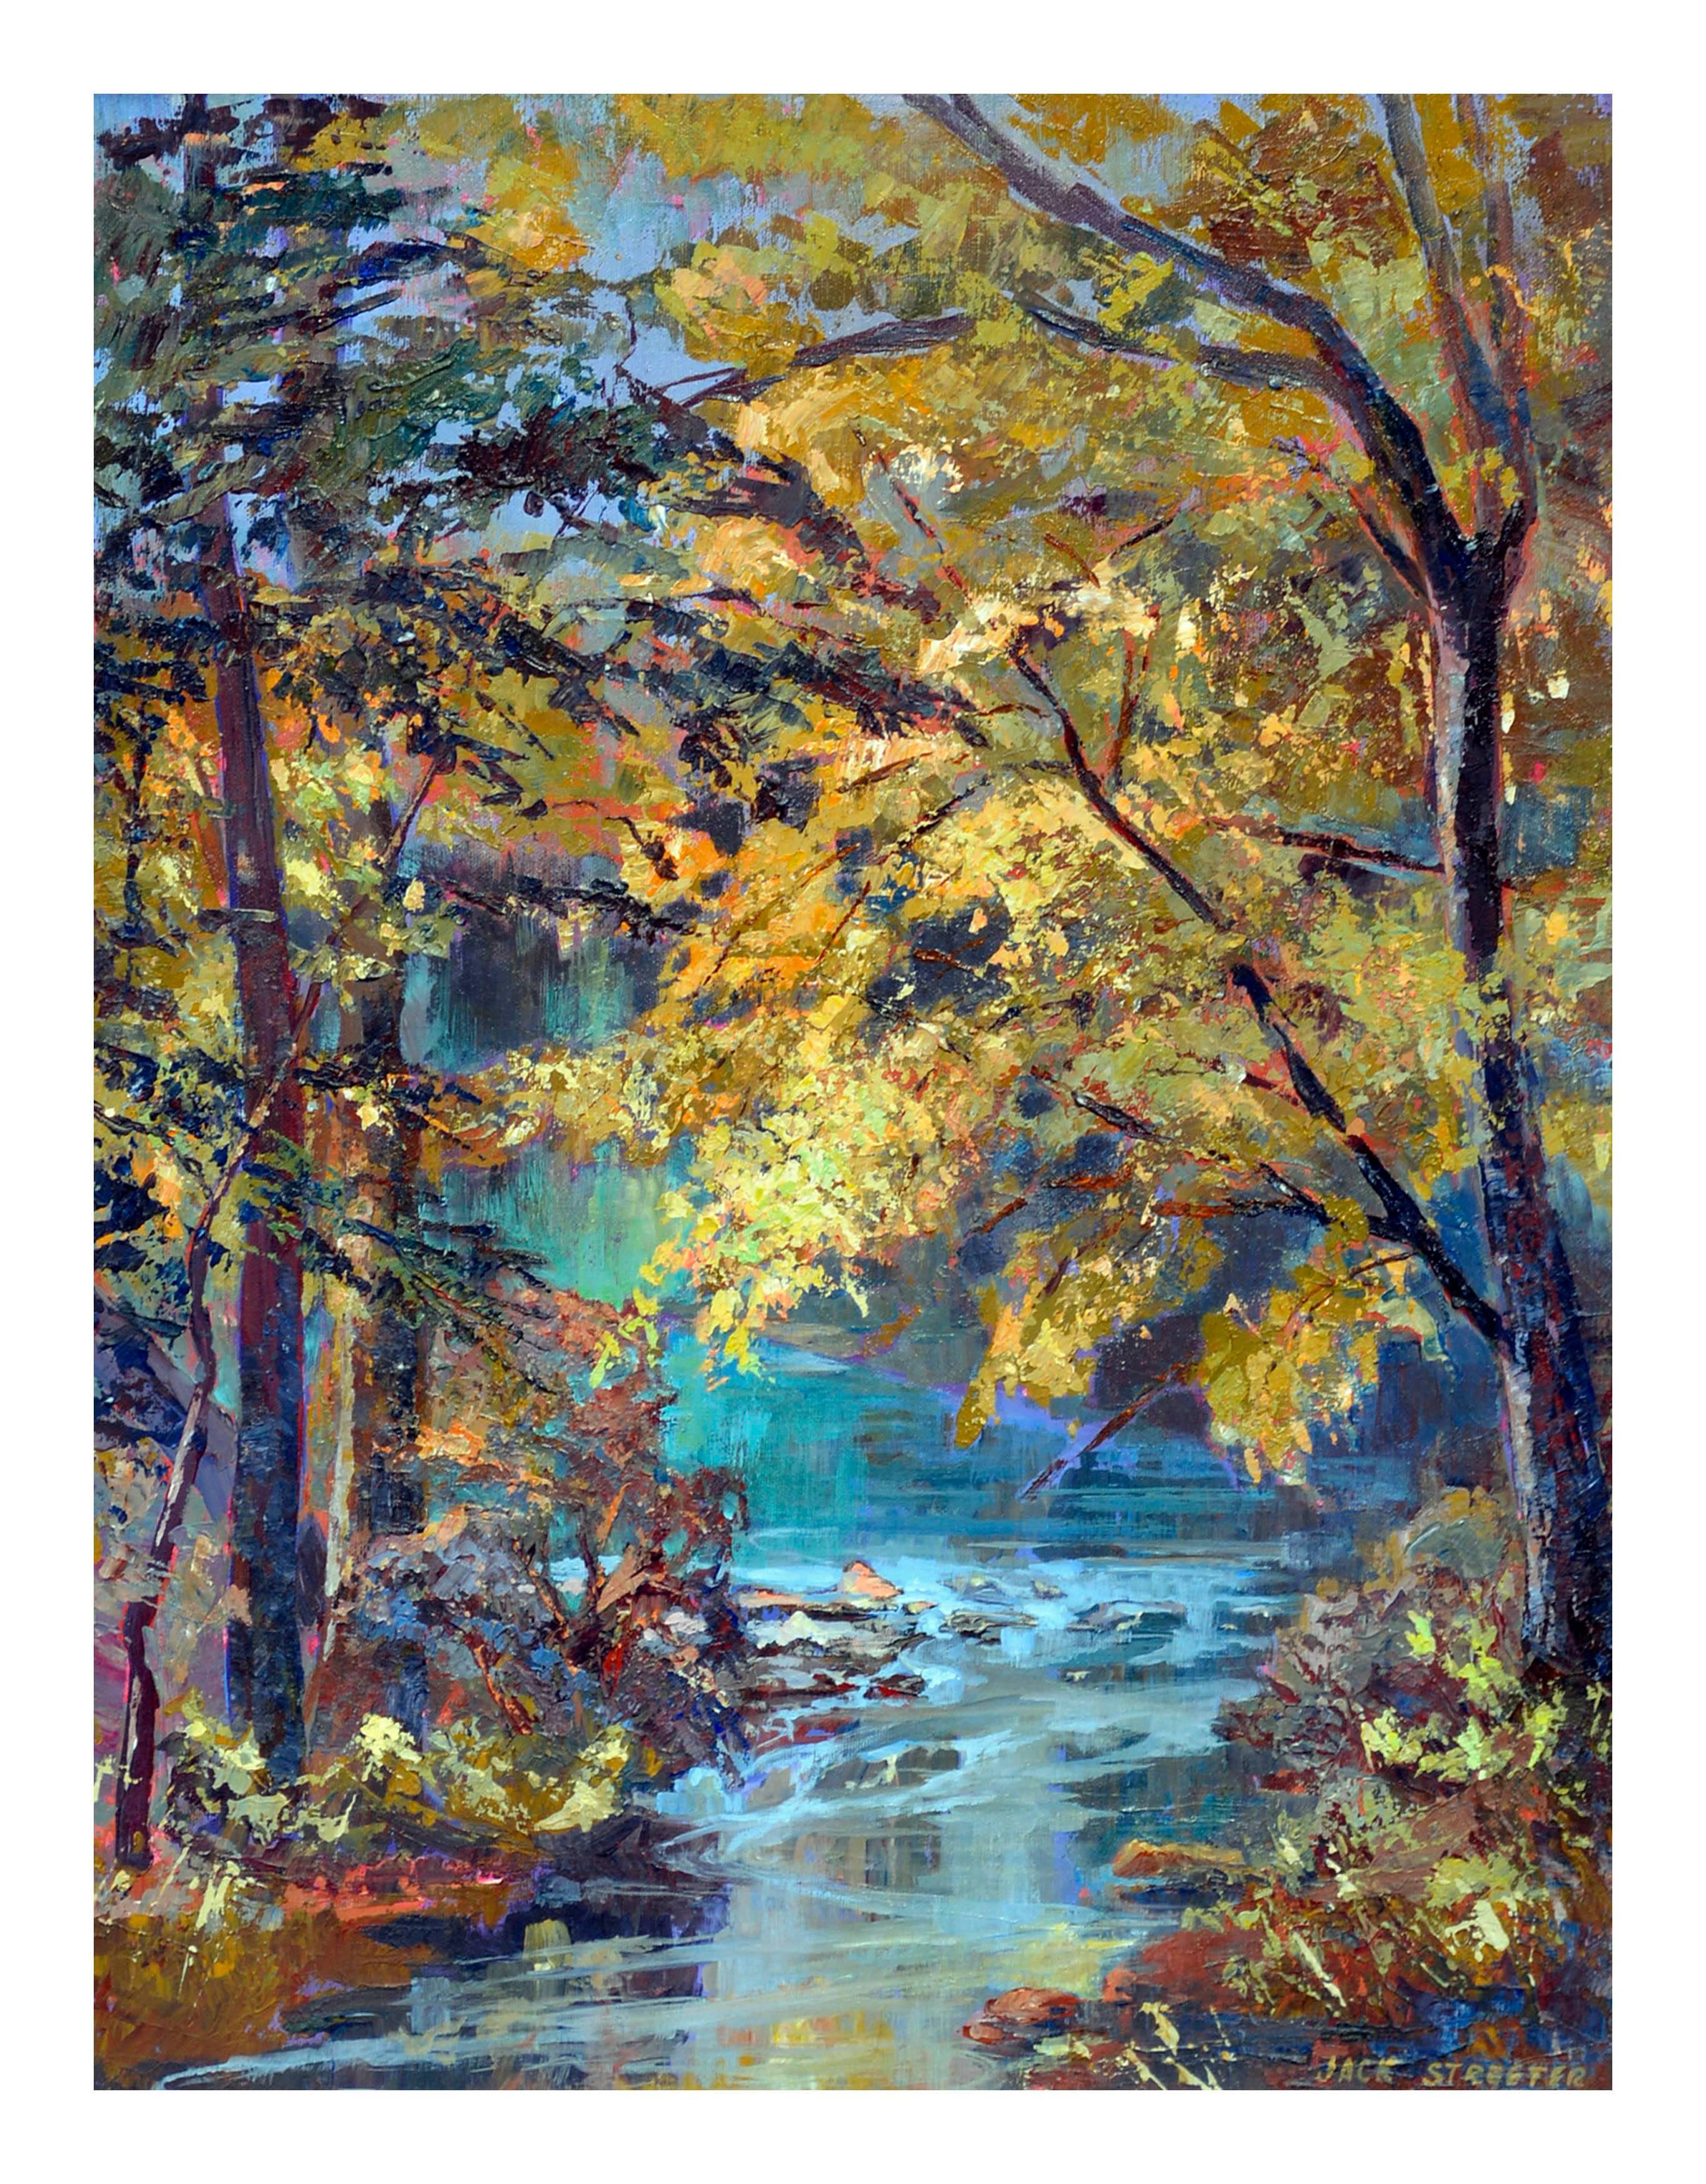 Lazy River - Painting by Jack Streeter